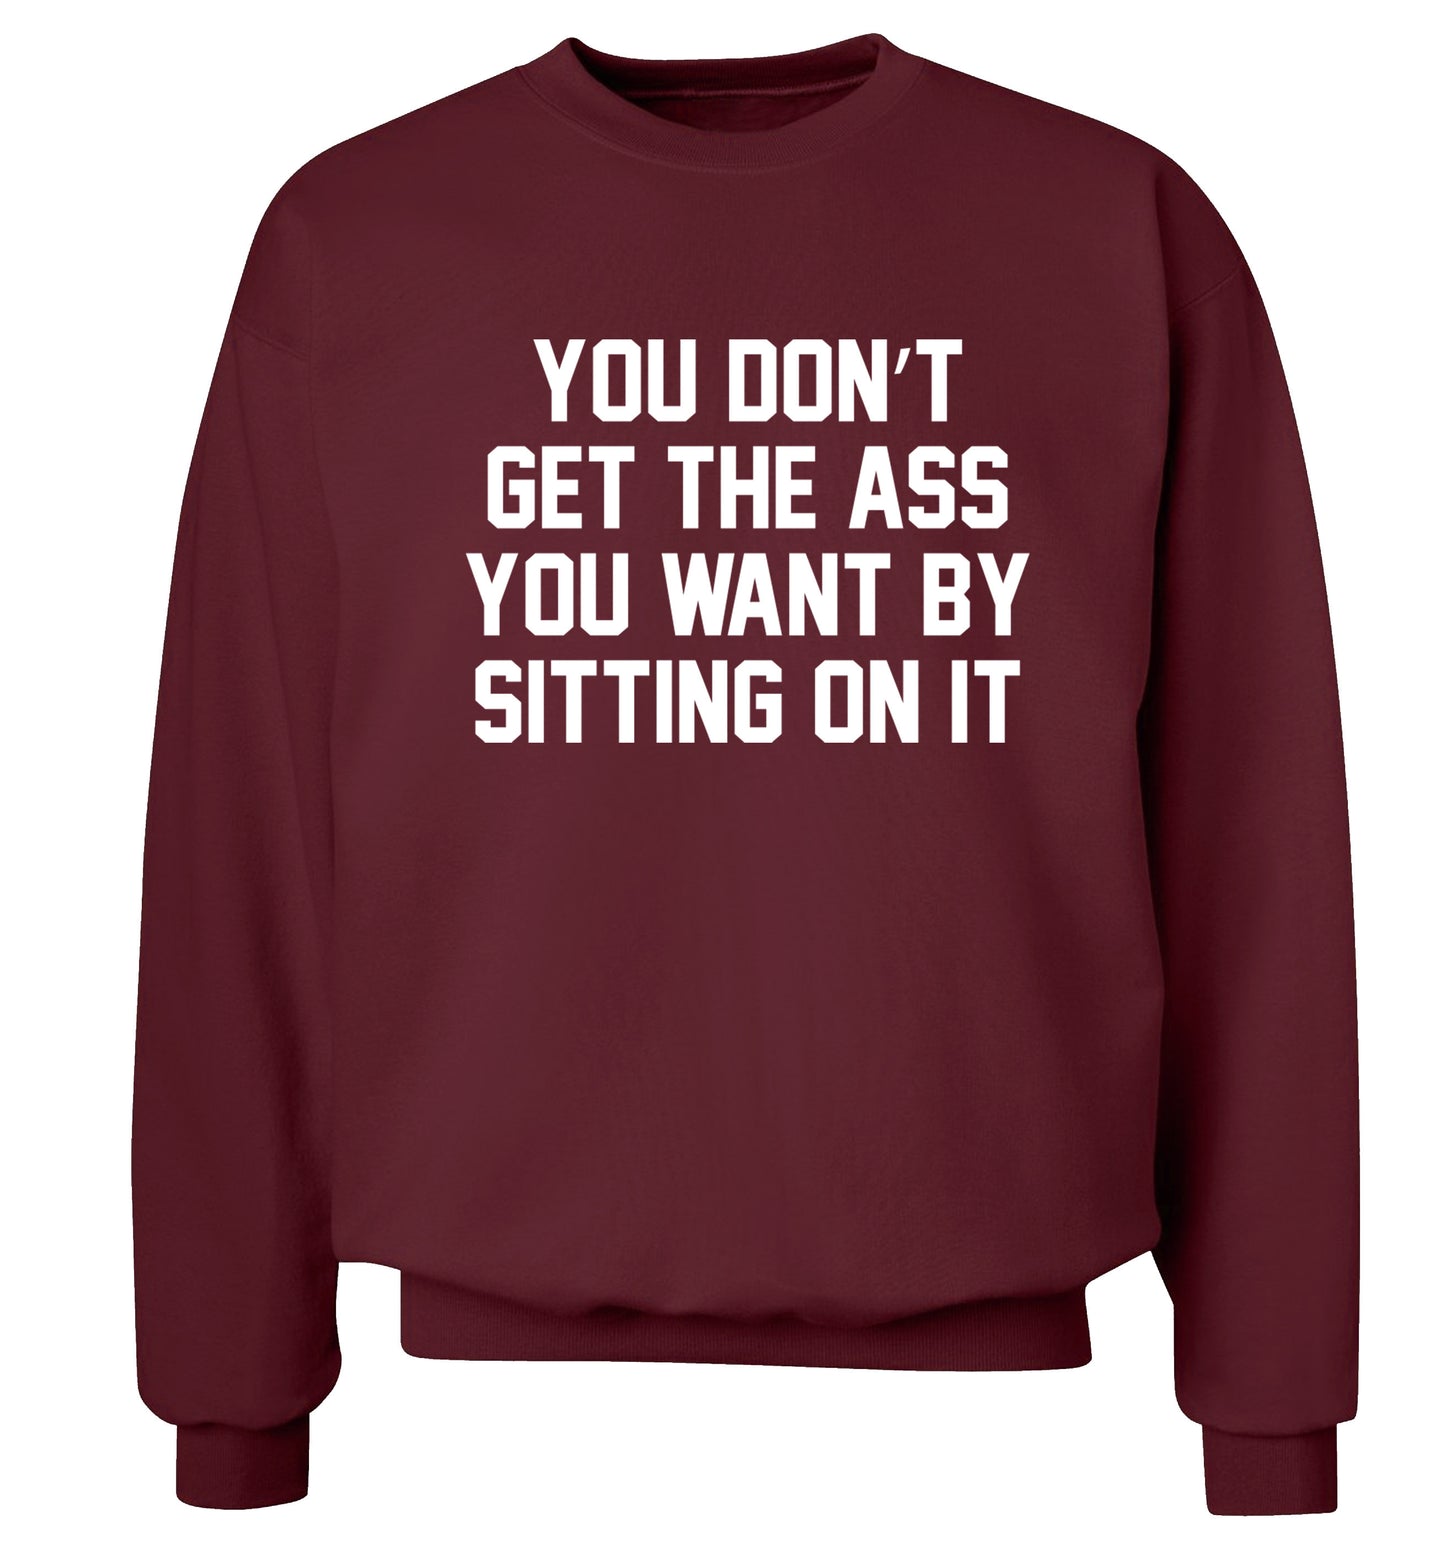 You don't get the ass you want by sitting on it Adult's unisex maroon Sweater 2XL